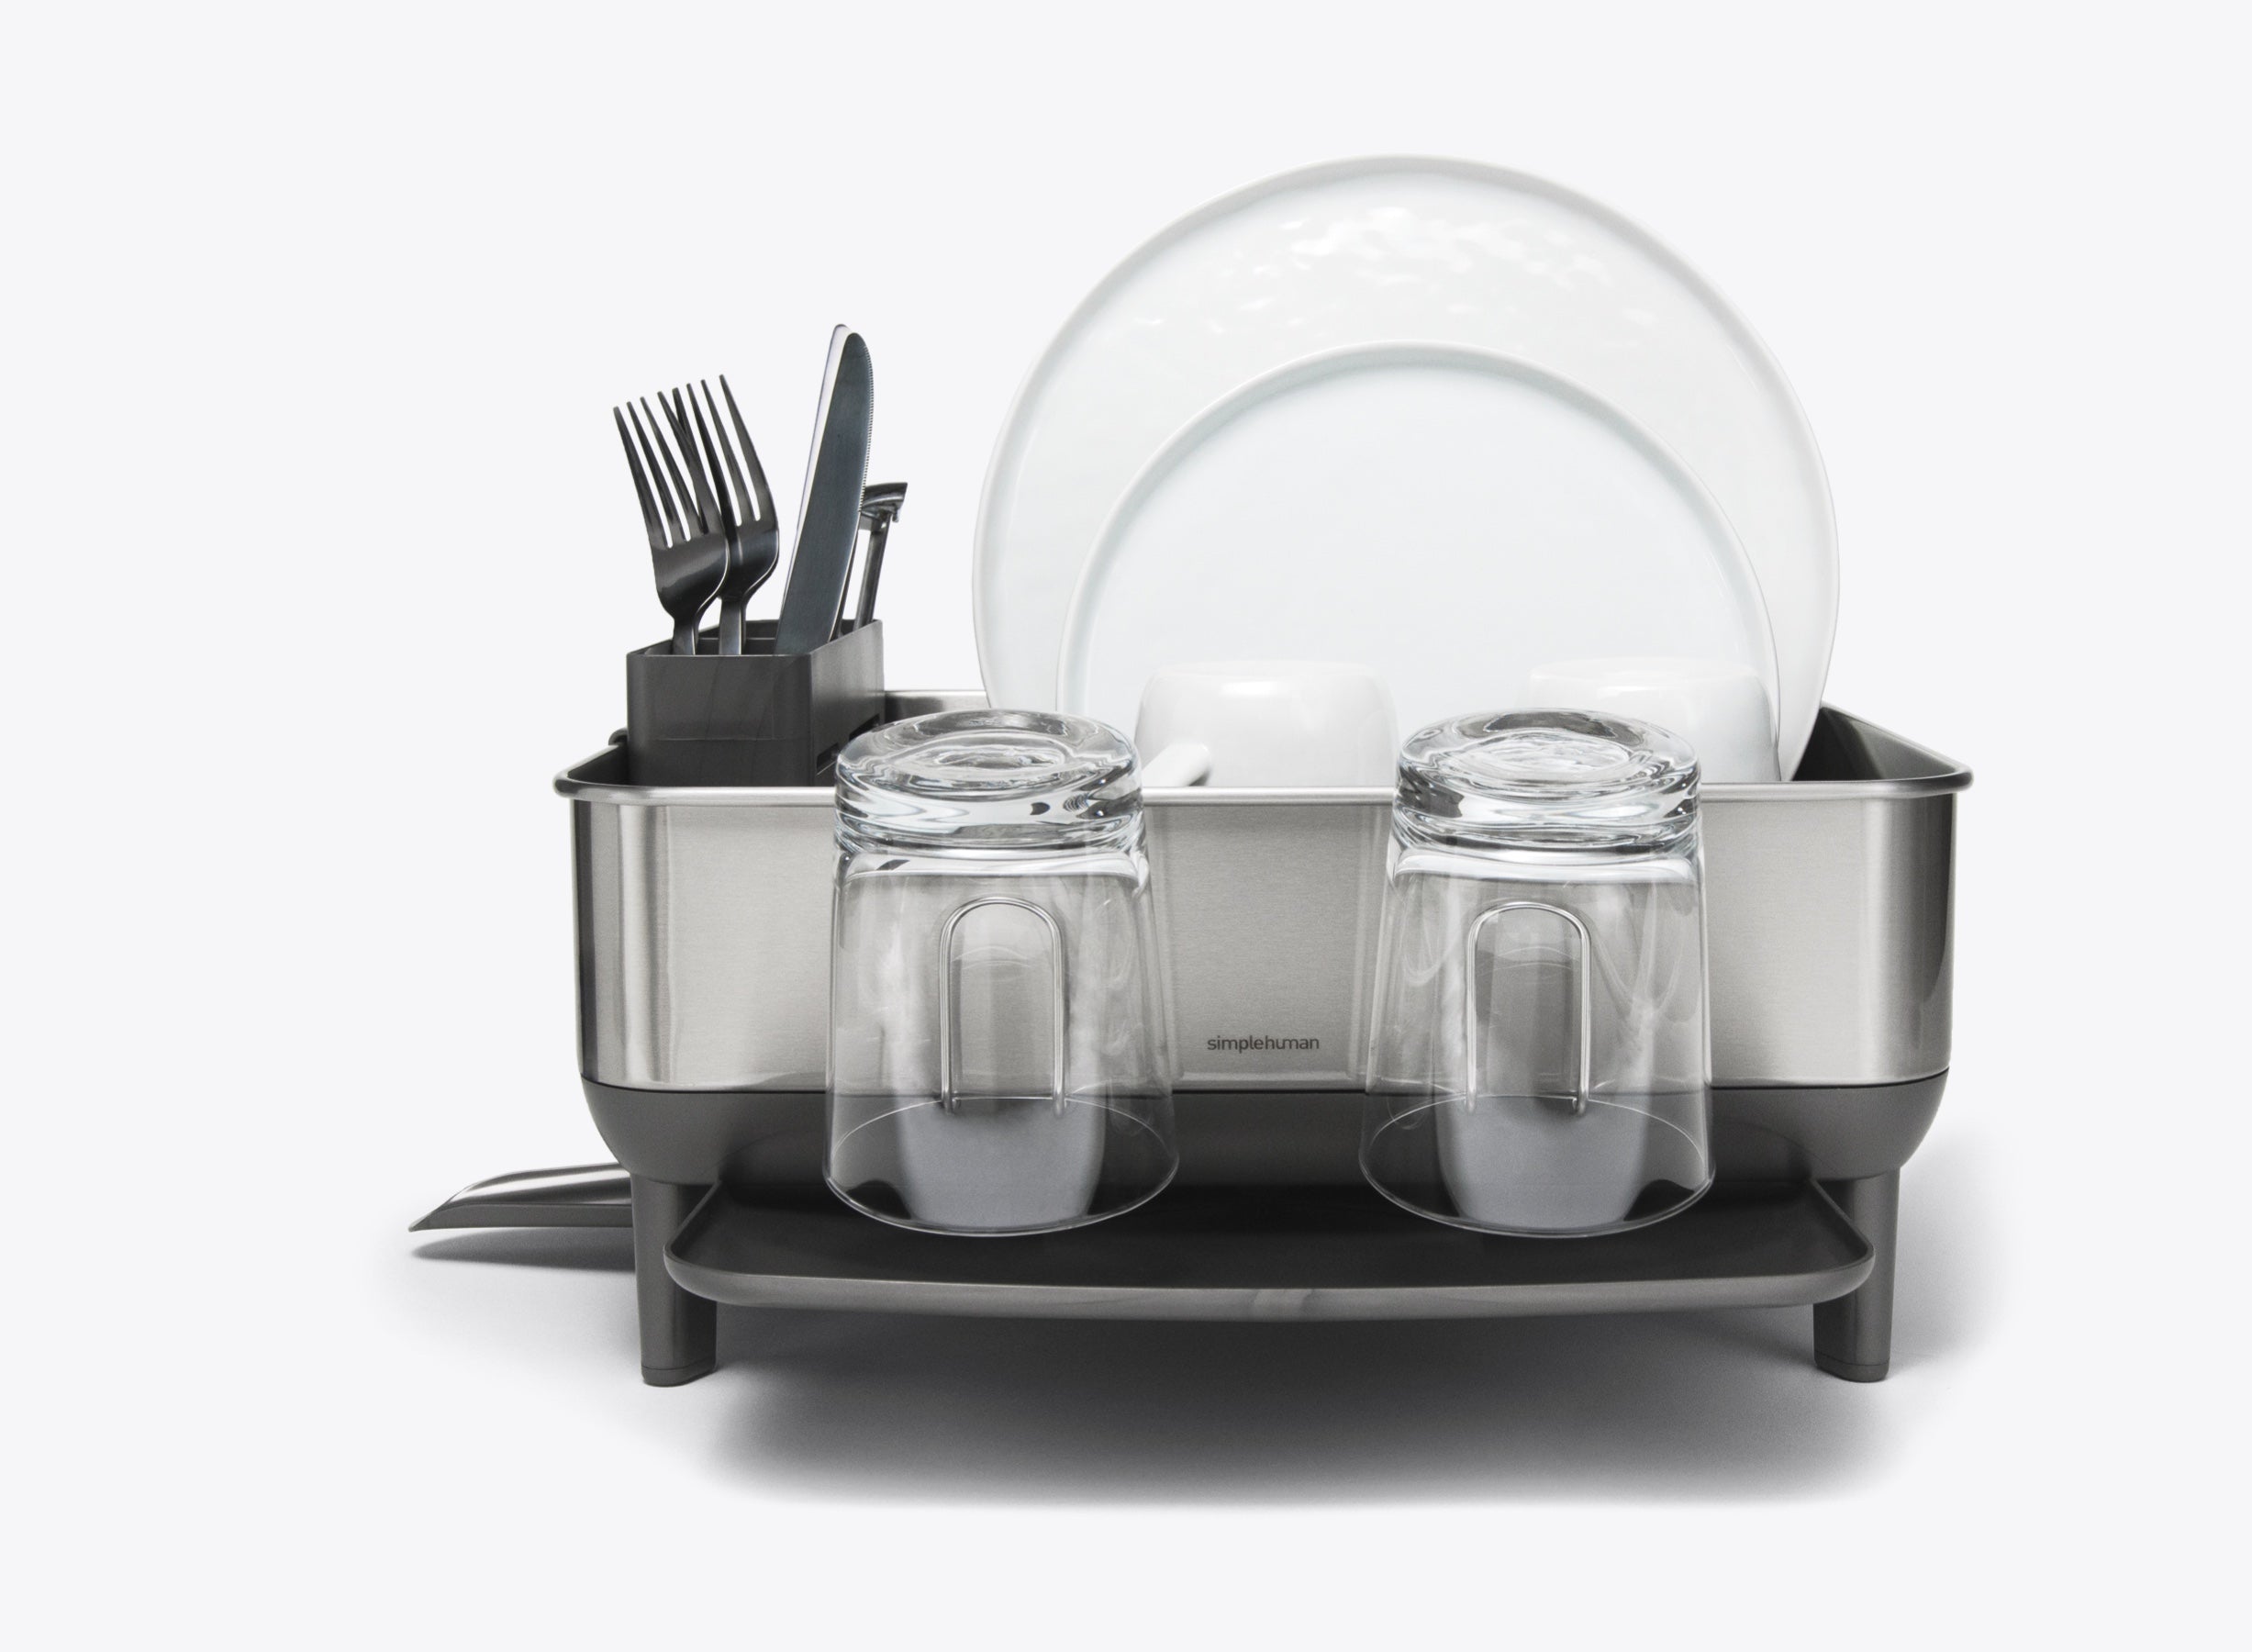 large capacity dishrack allows for many dishes to be piled in